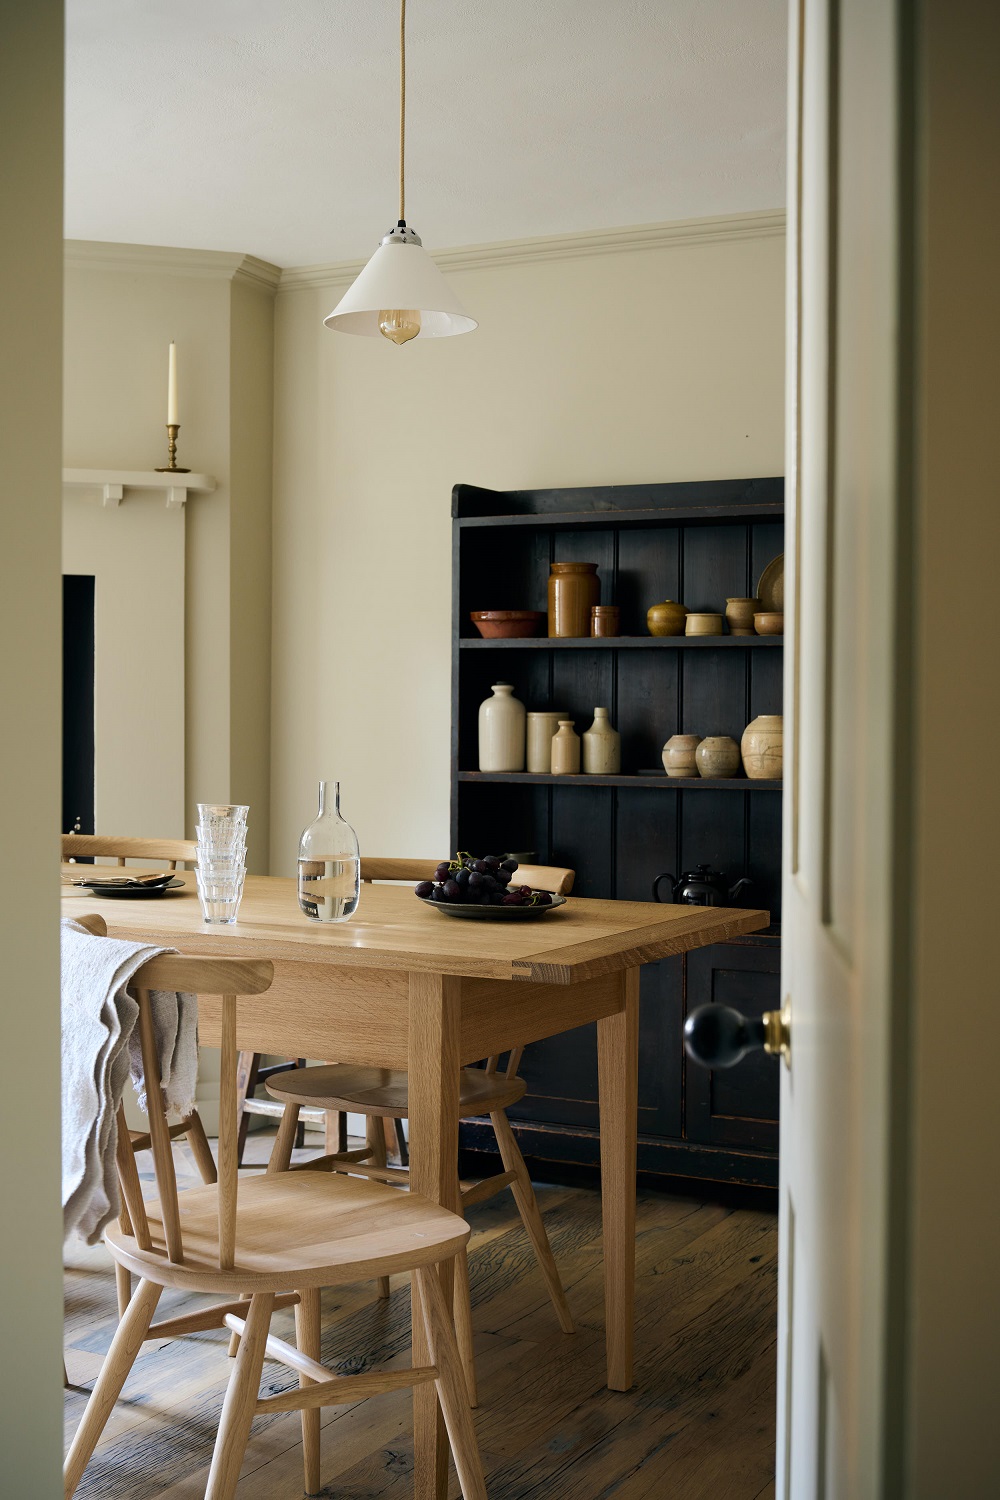 Kitchens_Review_The_Real_Shaker_Kitchen_DeVOL